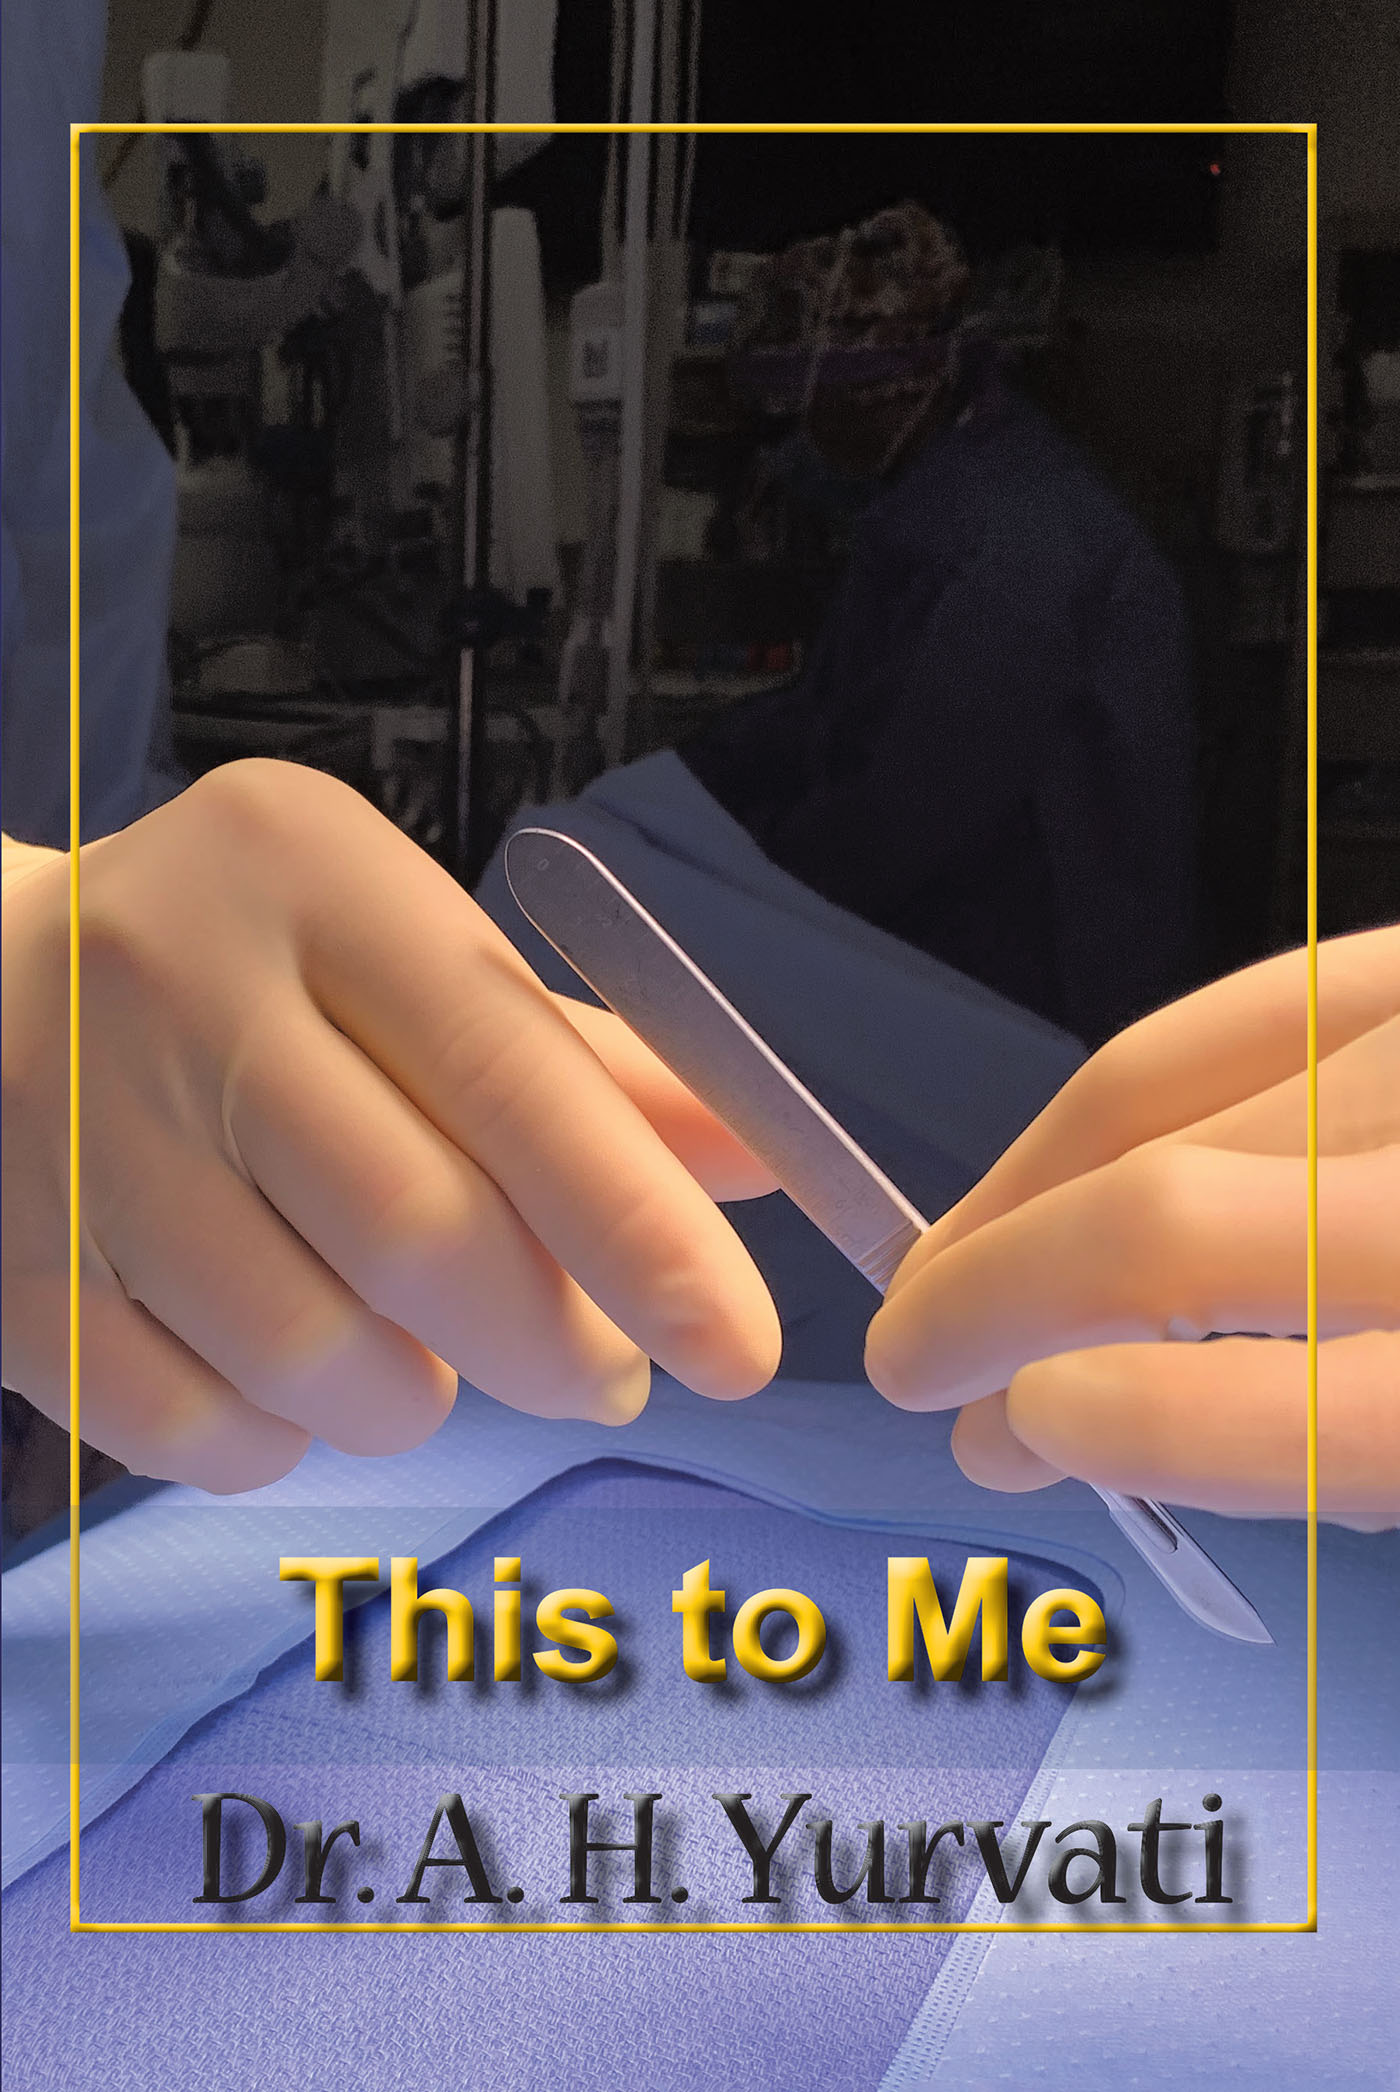 Dr. A.H. Yurvati’s New Book, “This to Me,” Follows the Author Through His Own Medical Complications After Dedicating His Entire Life to Helping Others as a Doctor